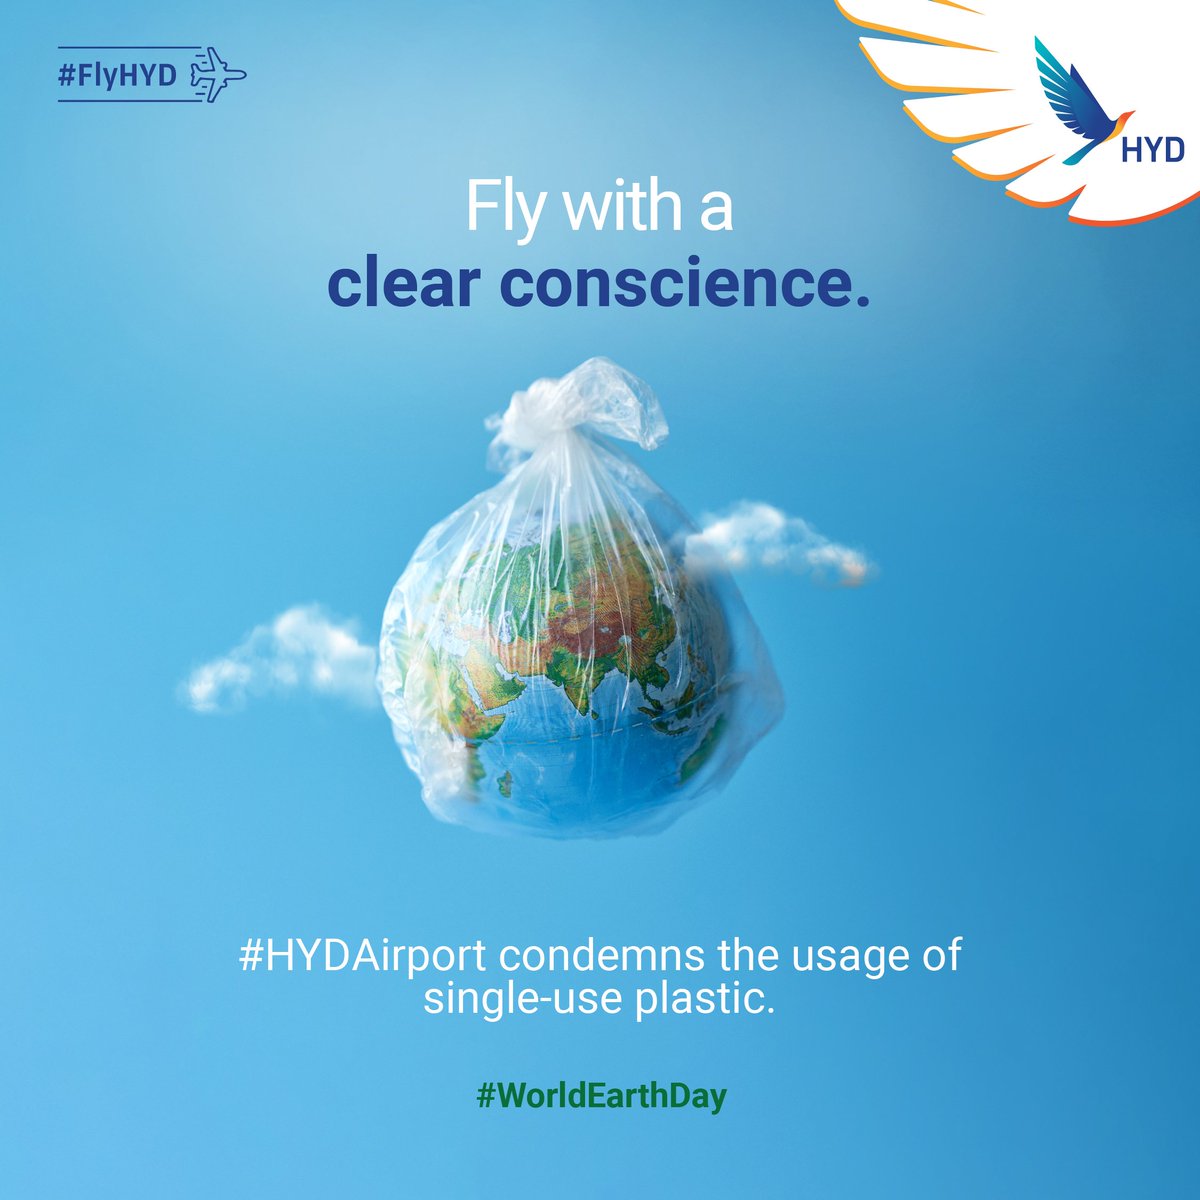 Protect our planet - it's our duty! #HYDAirport joins #EarthDay2024: 'Planet vs. Plastics.' A cleaner future starts now. #FlyHYD #ExperienceEpicEveryday #OnePlanetOneHome #CleanGreenFuture #EarthDay #SustainableLiving @incredibleindia @TelanganaCMO @MinOfCultureGoI @TANAsocial